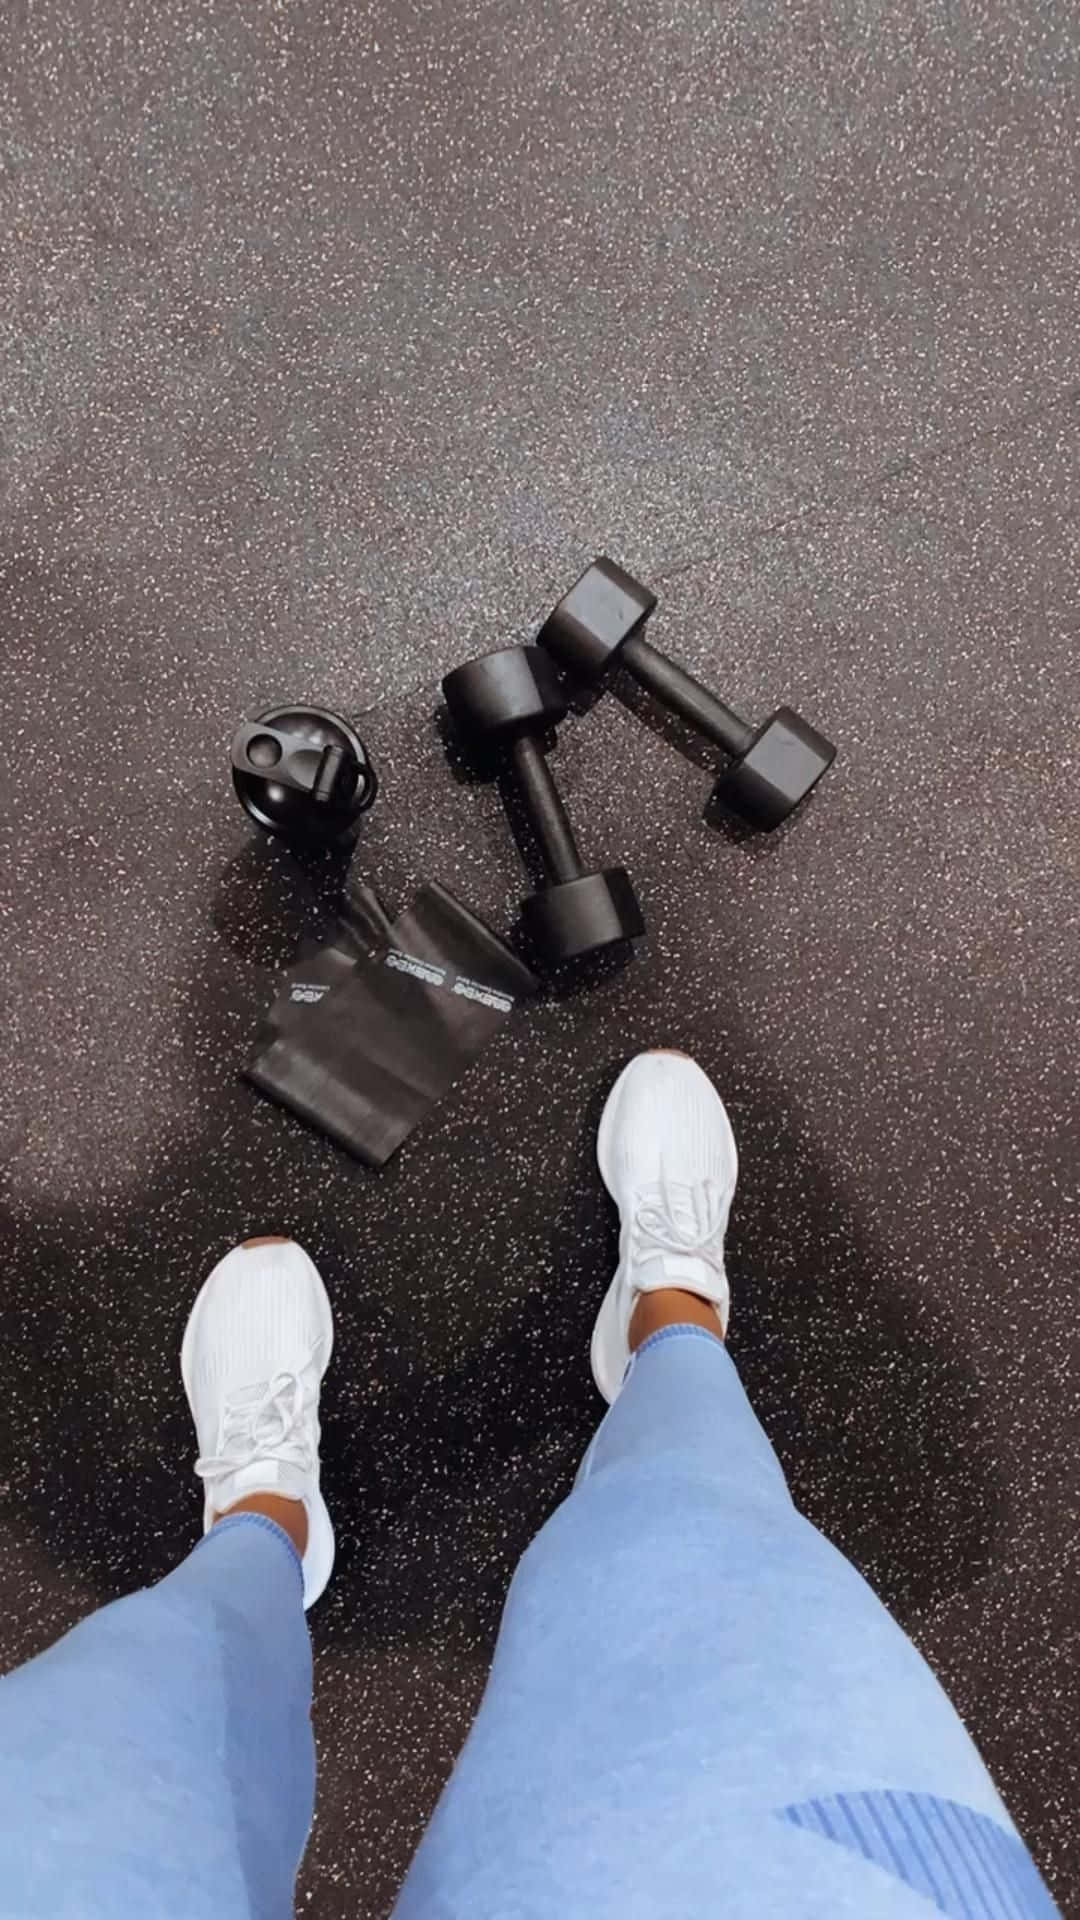 a person standing on a gym floor with dumbbells Wallpaper